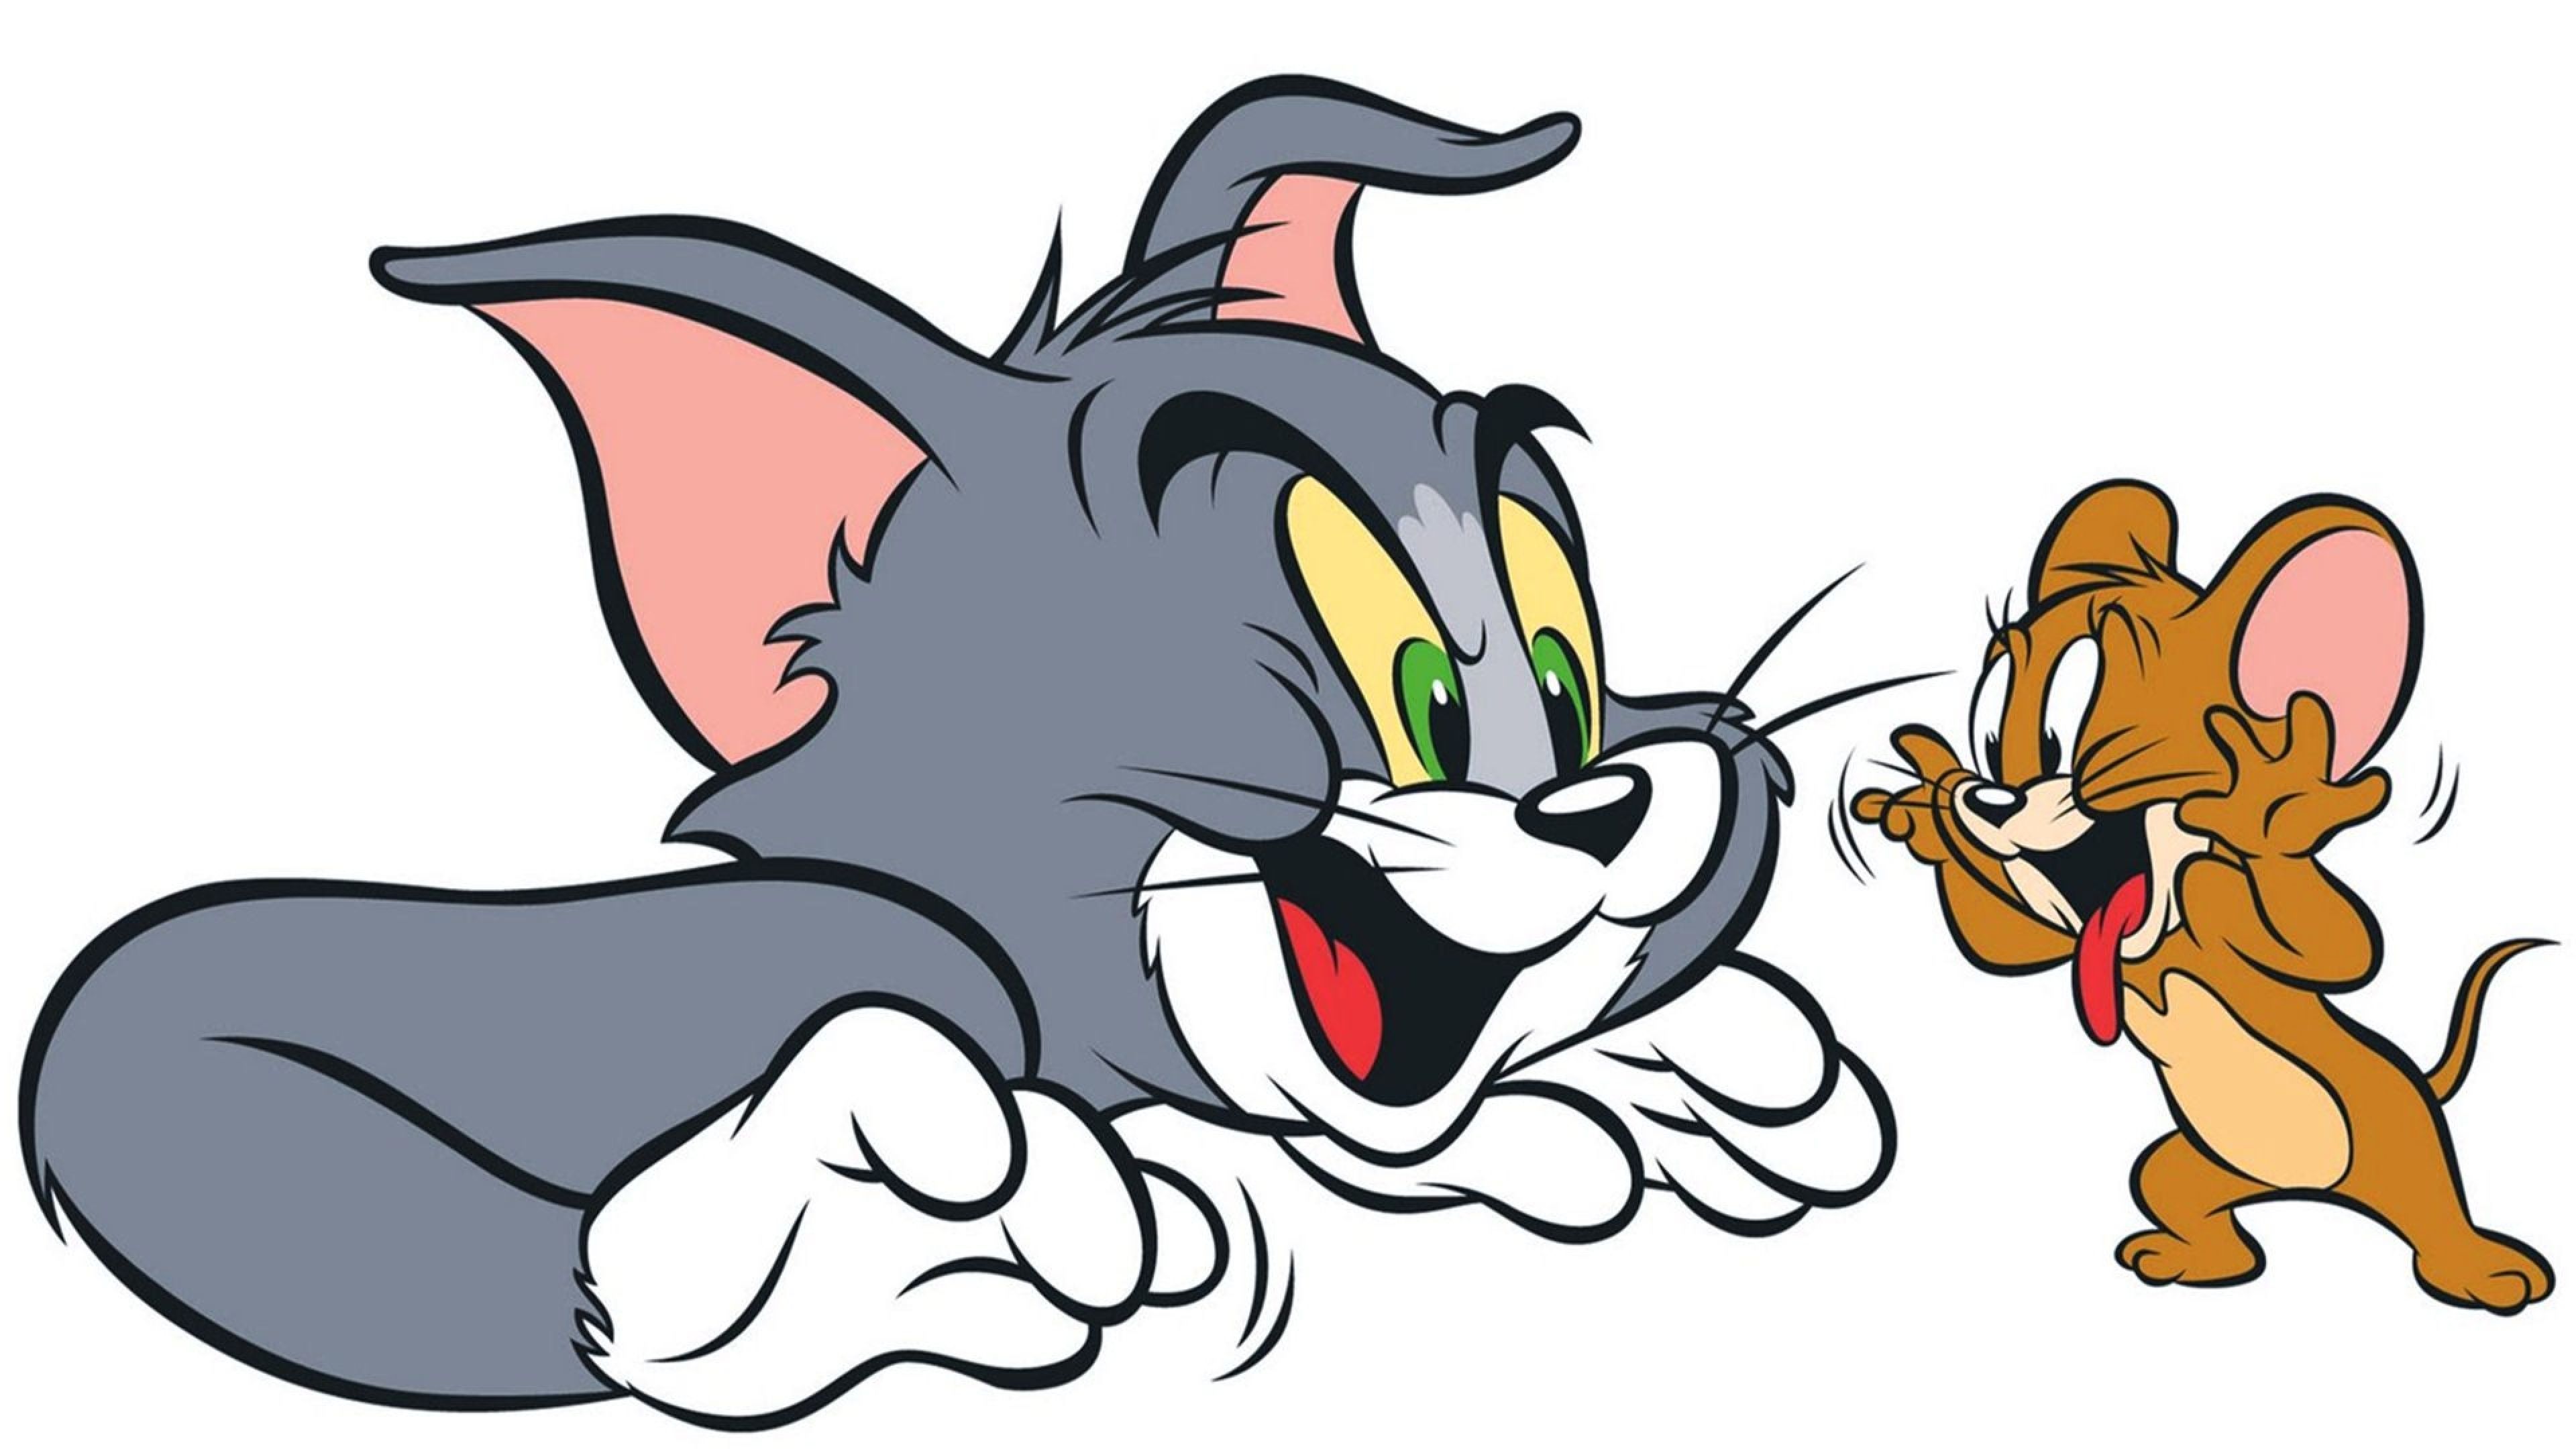 Tom and Jerry 4K Wallpaper Free Tom and Jerry 4K Background